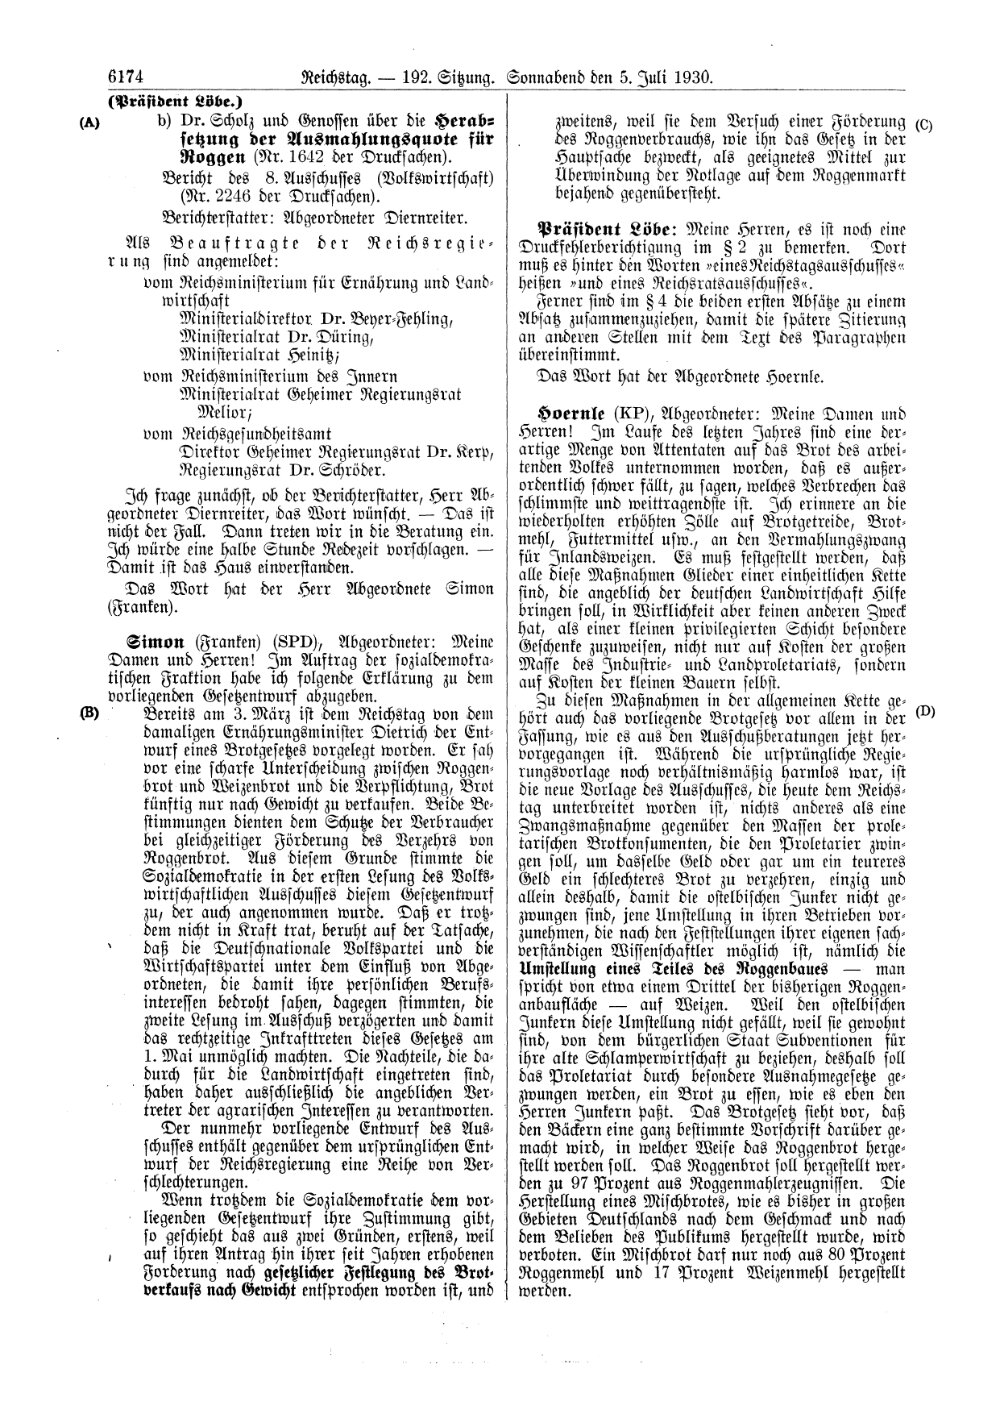 Scan of page 6174